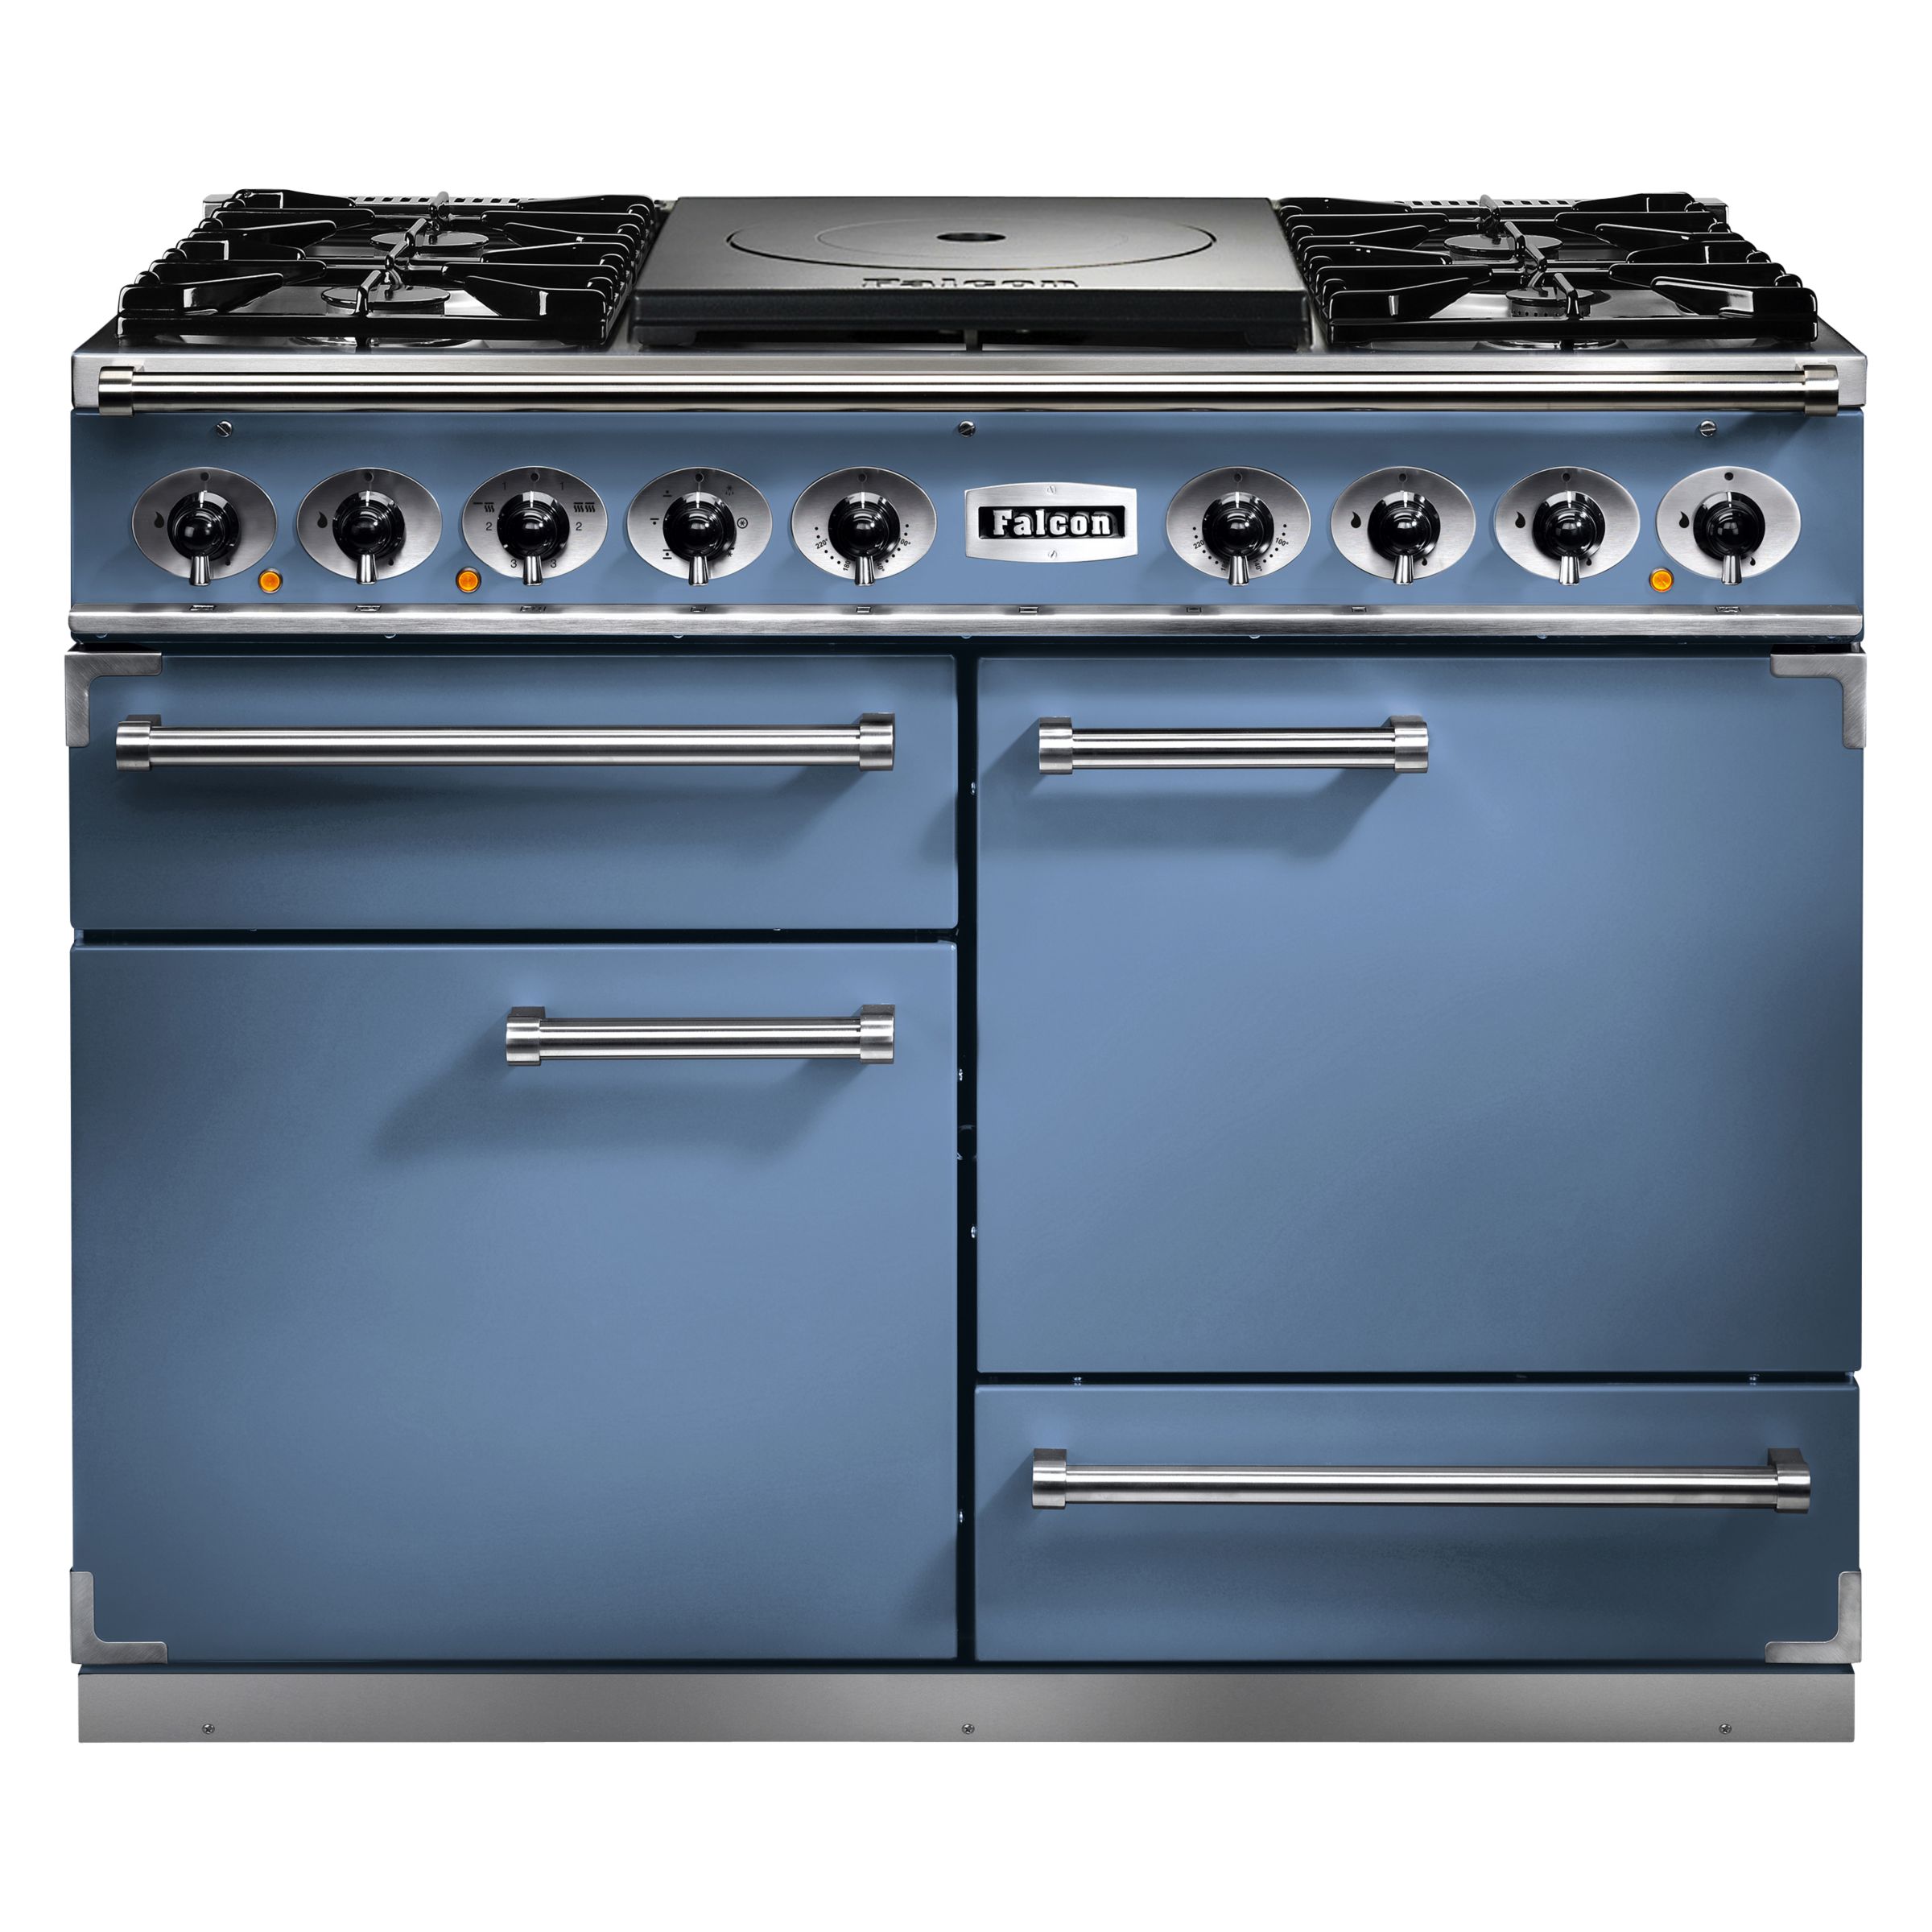 Falcon 1092 Deluxe Cooktop Dual Fuel Range Cooker, China Blue/ Nickel Trim/Matt Pan Supports at John Lewis